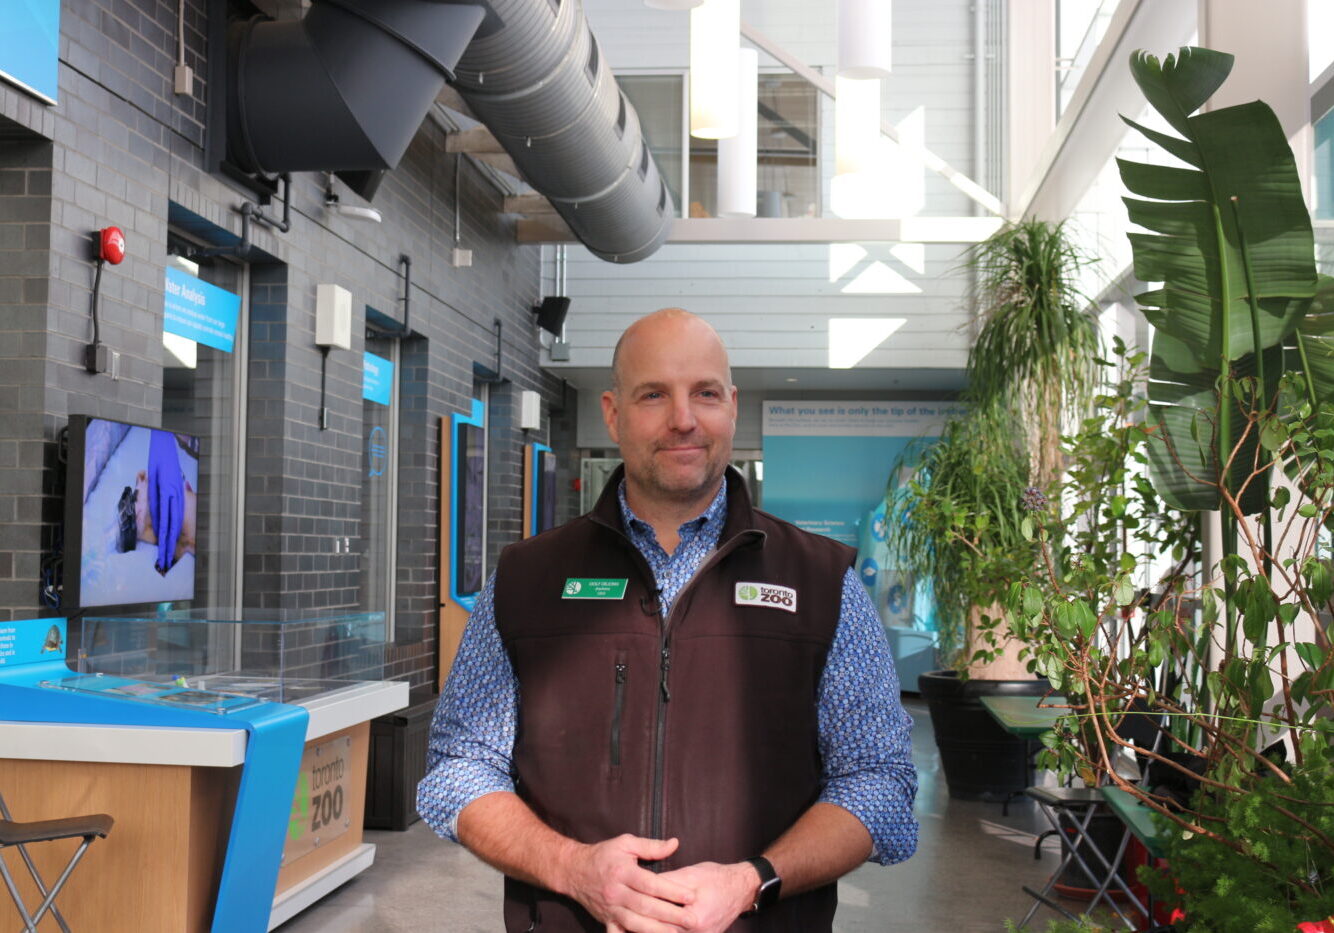 Toronto Zoo CEO Dolf Dejong stands in front of the surgical suites and beside plants.